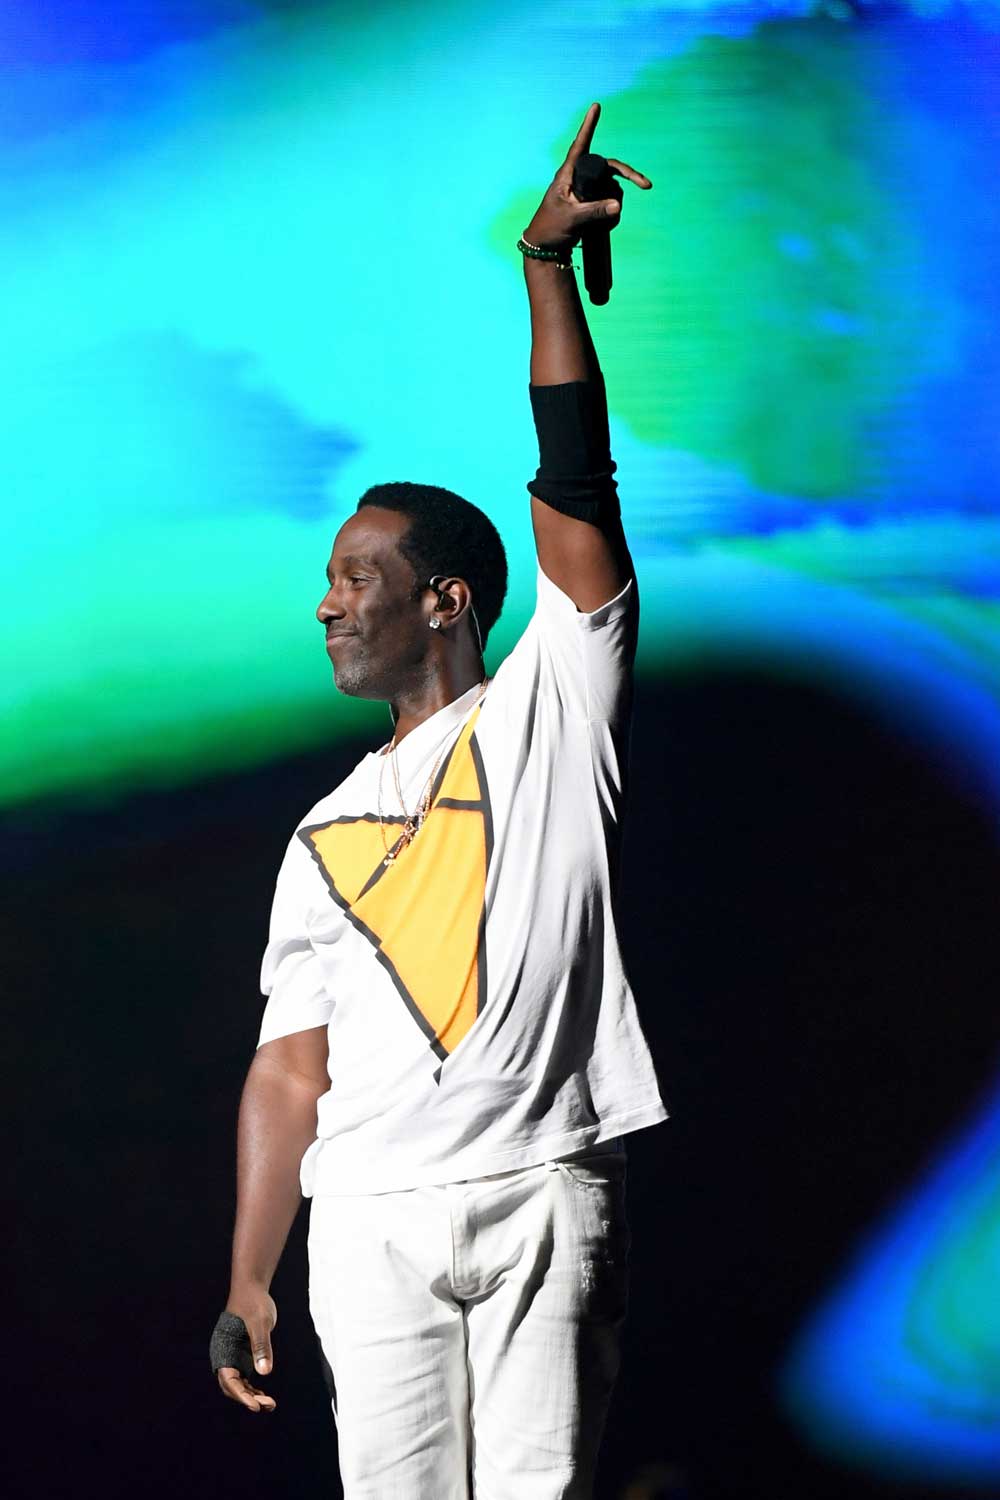 Shawn Stockman (Credit: Gettyimage)